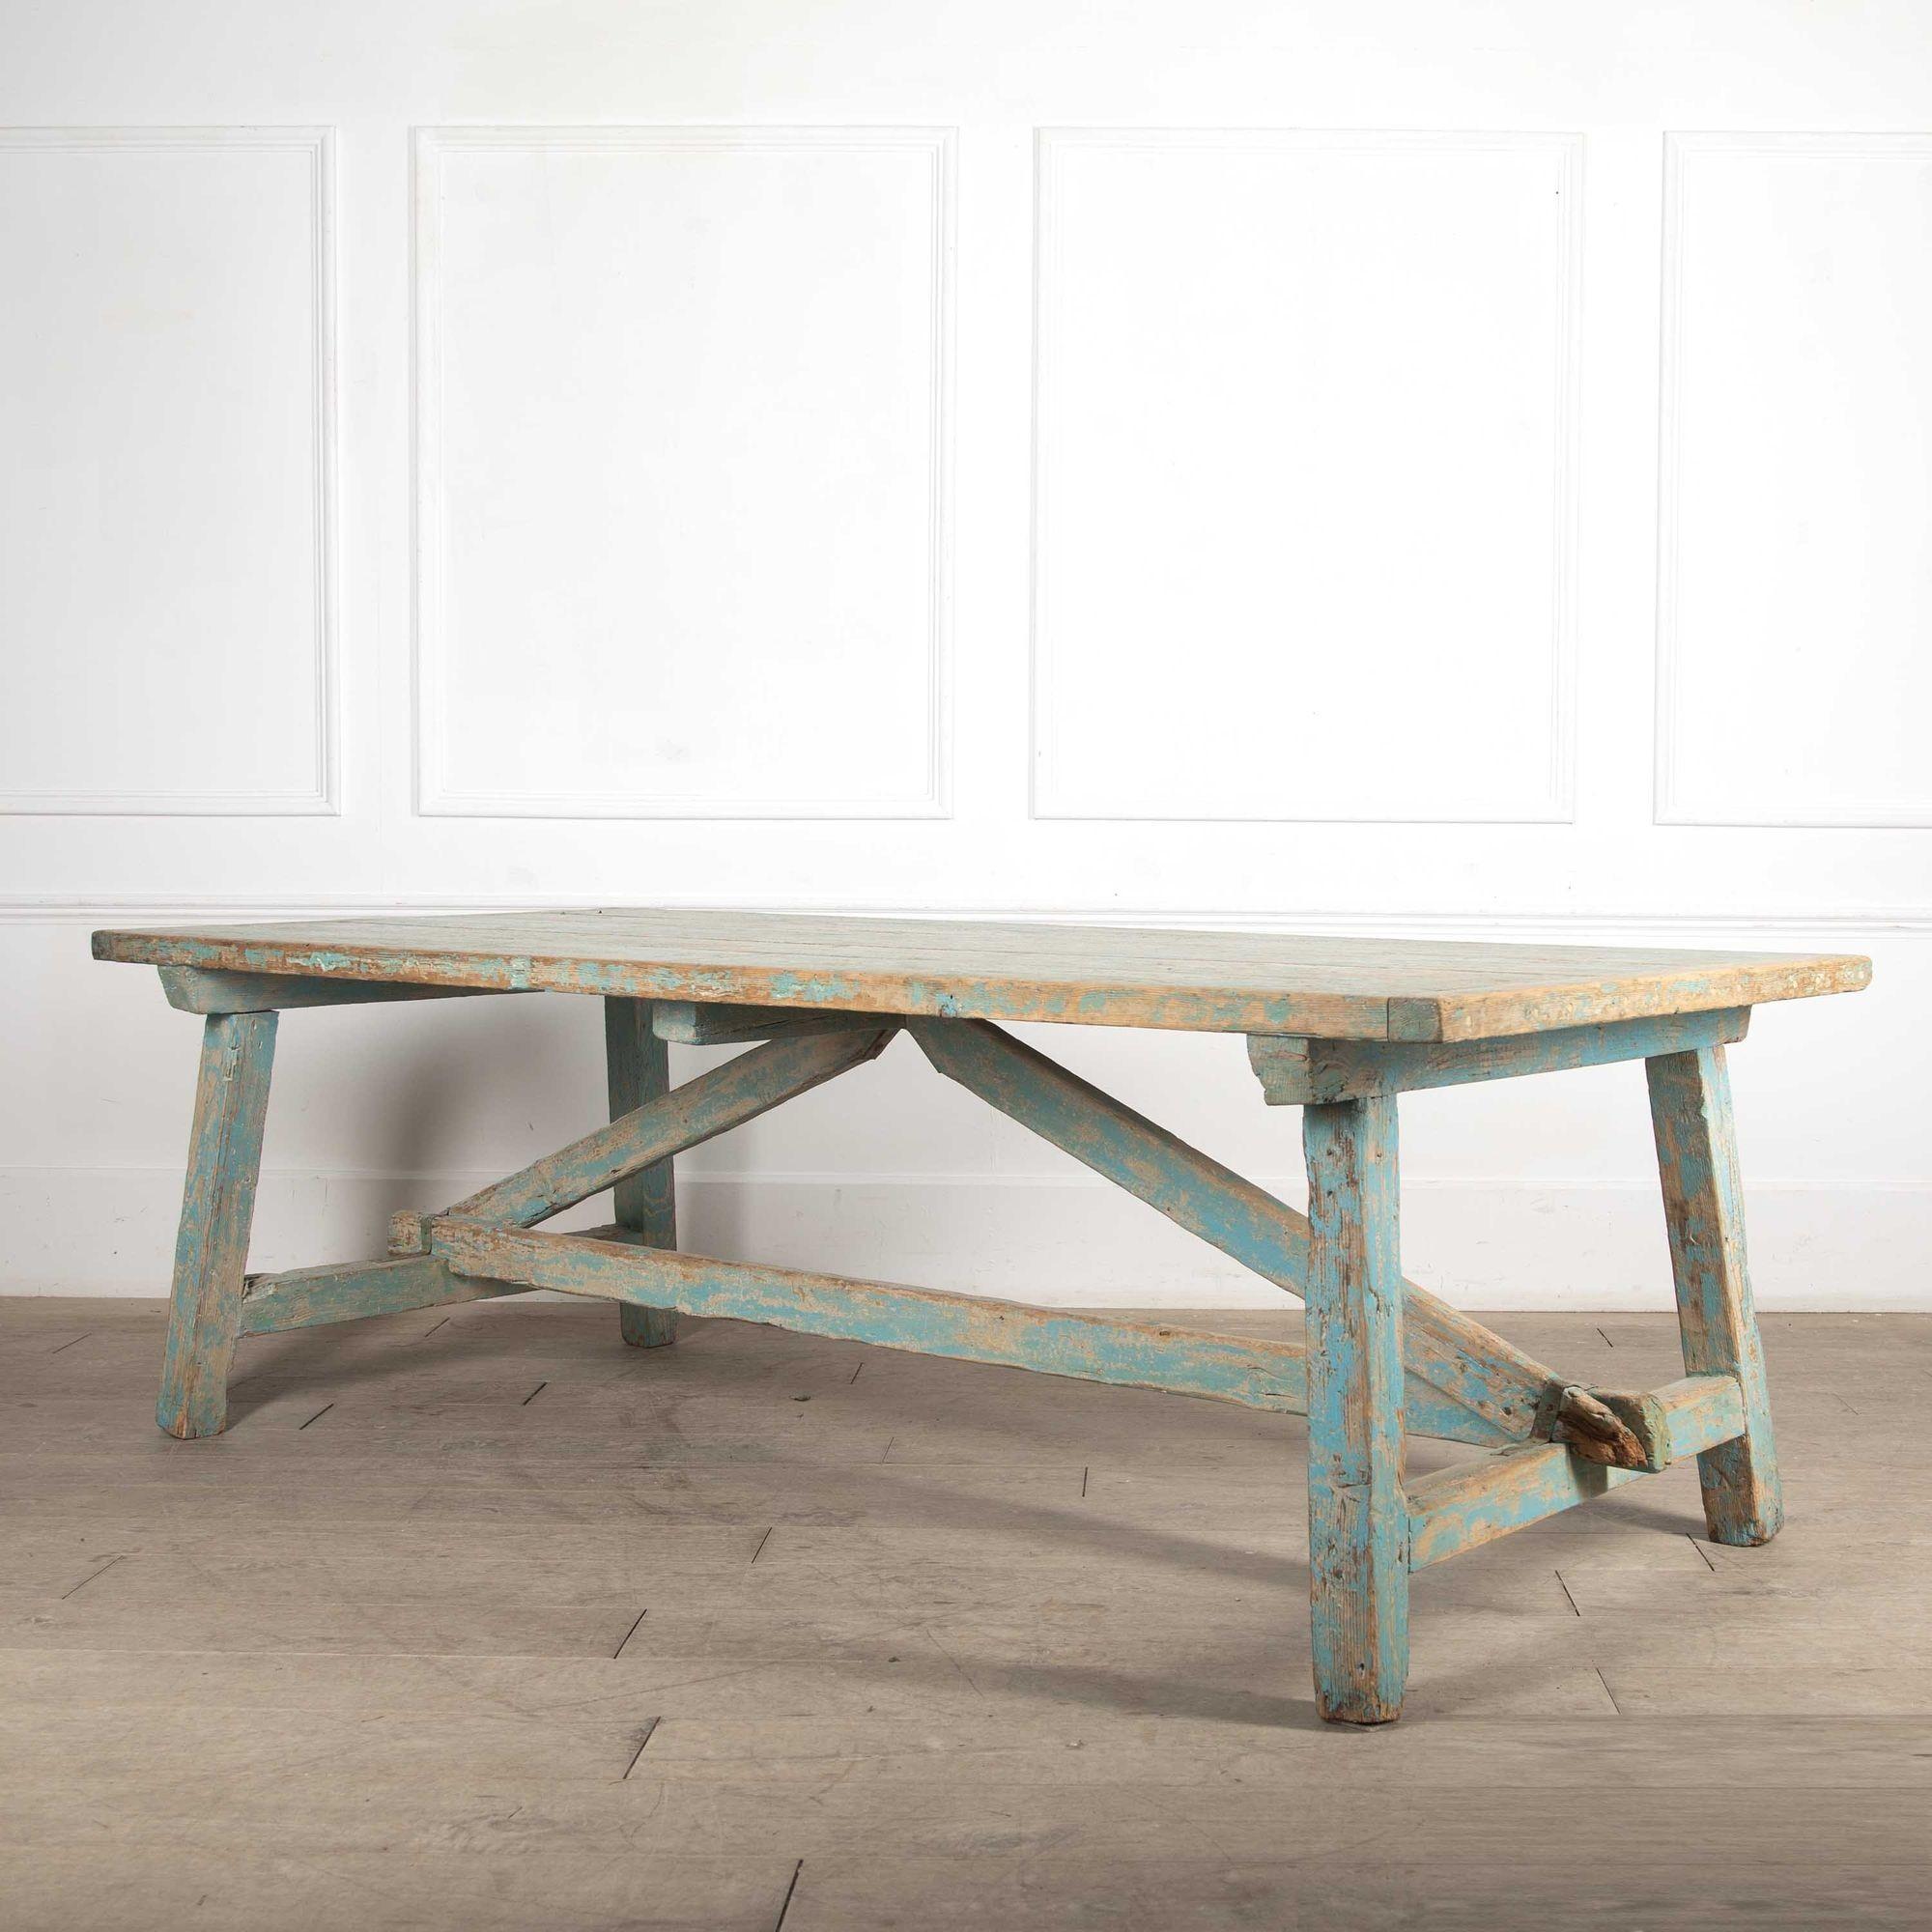 Striking Mid-19th Century French pine farmhouse dining table.
With a stunning thick top and wearing an old 20th century powder blue paint finish and rustic repairs to the base.
circa 1840.